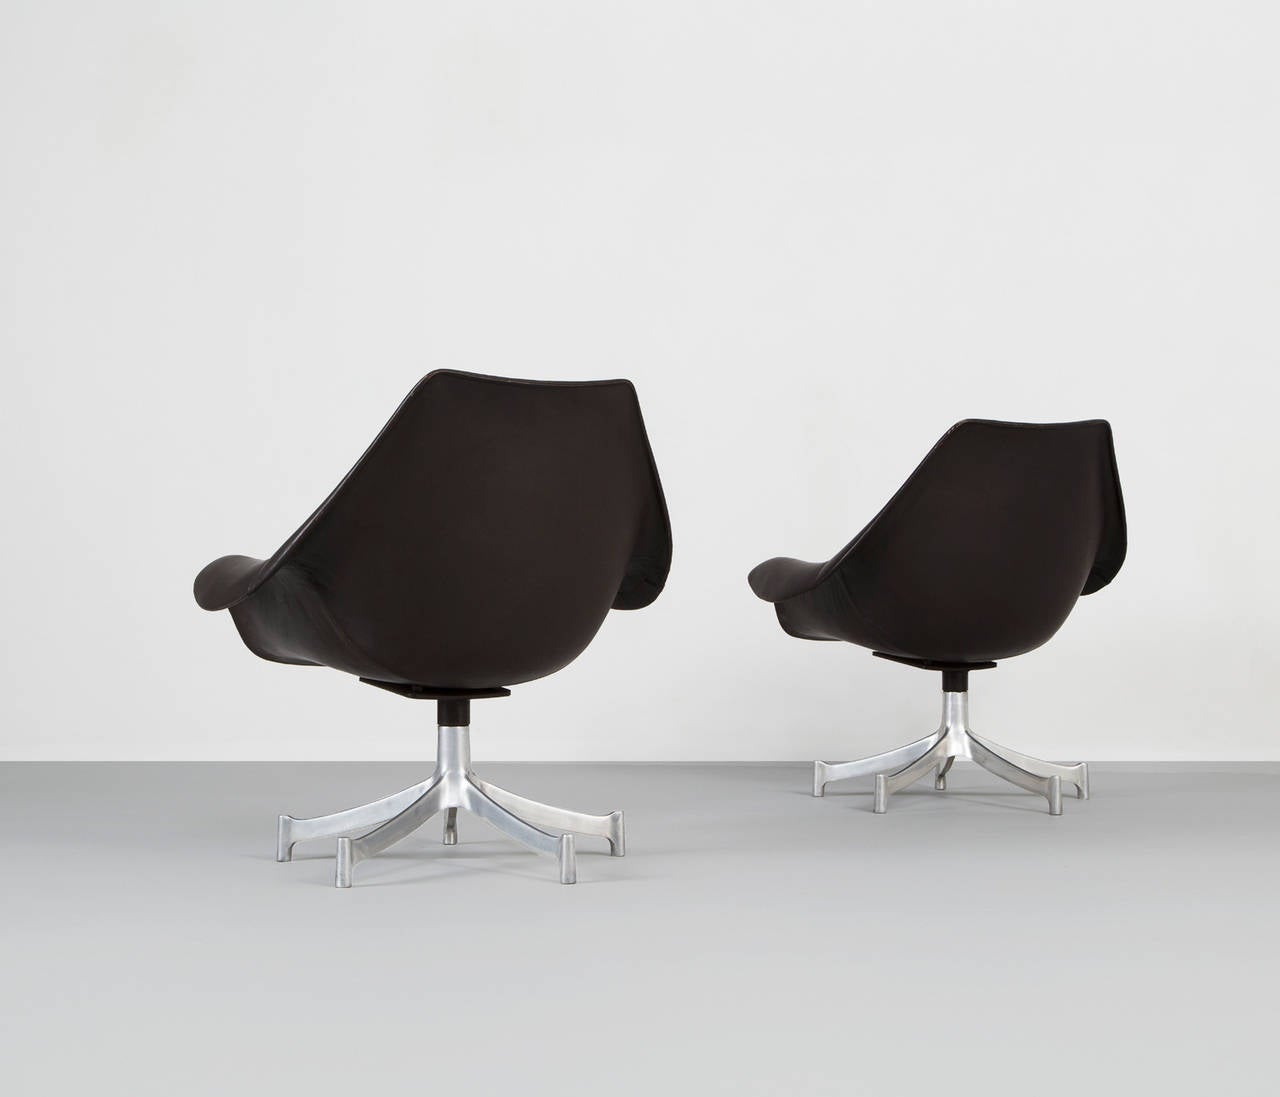 Scandinavian Modern Set of Two Office Chairs Designed by Jørgen Lund and Ole Larsen